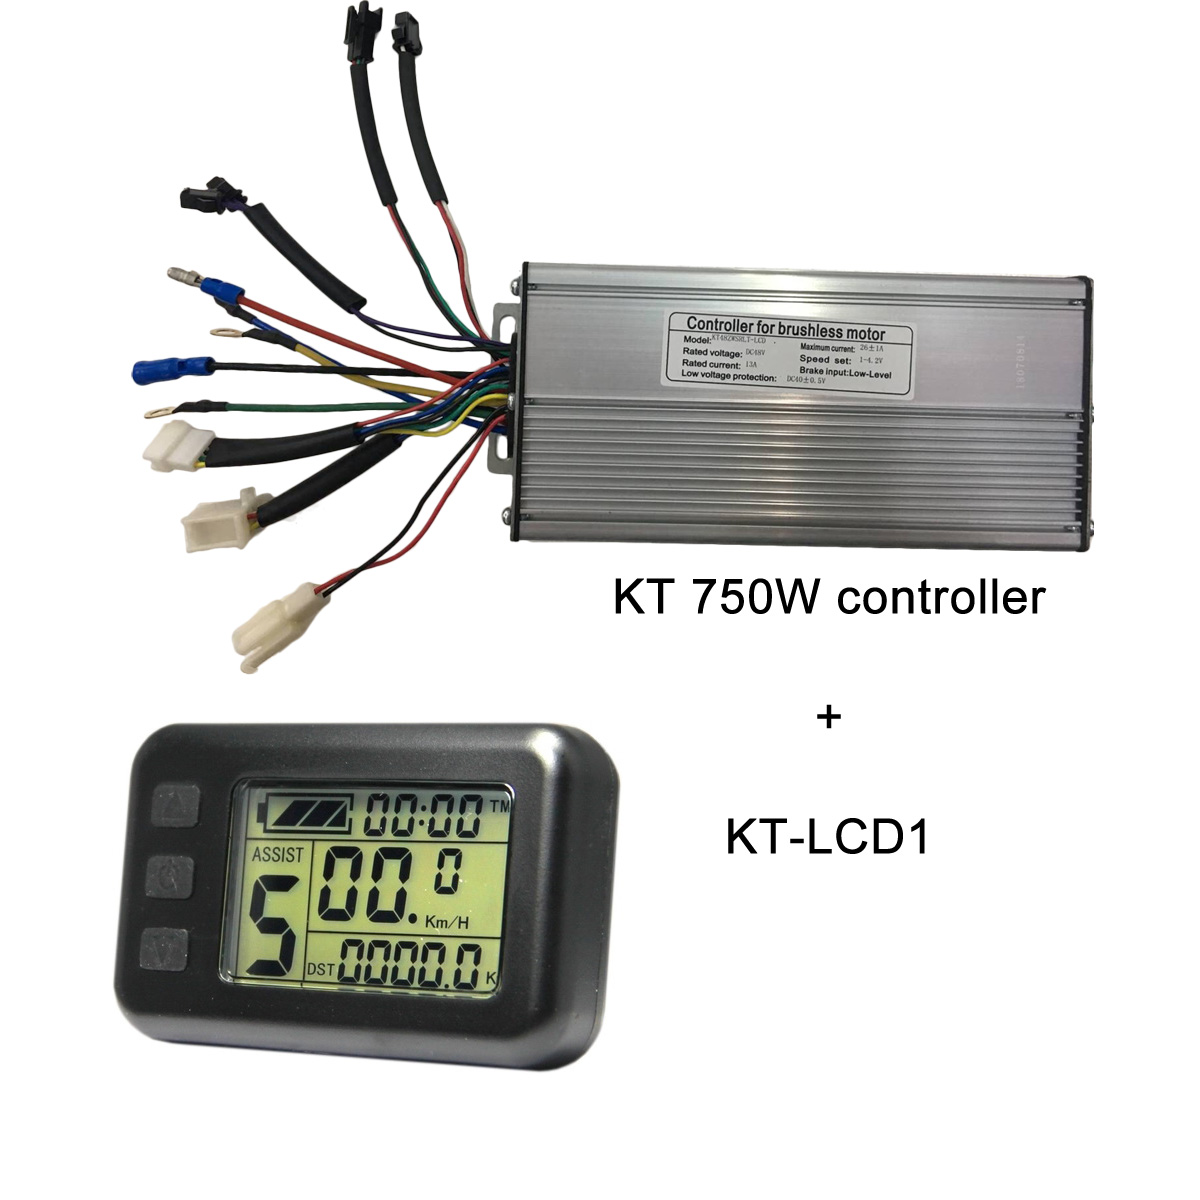 KT controllers wit KT-LCD1 electric bike display